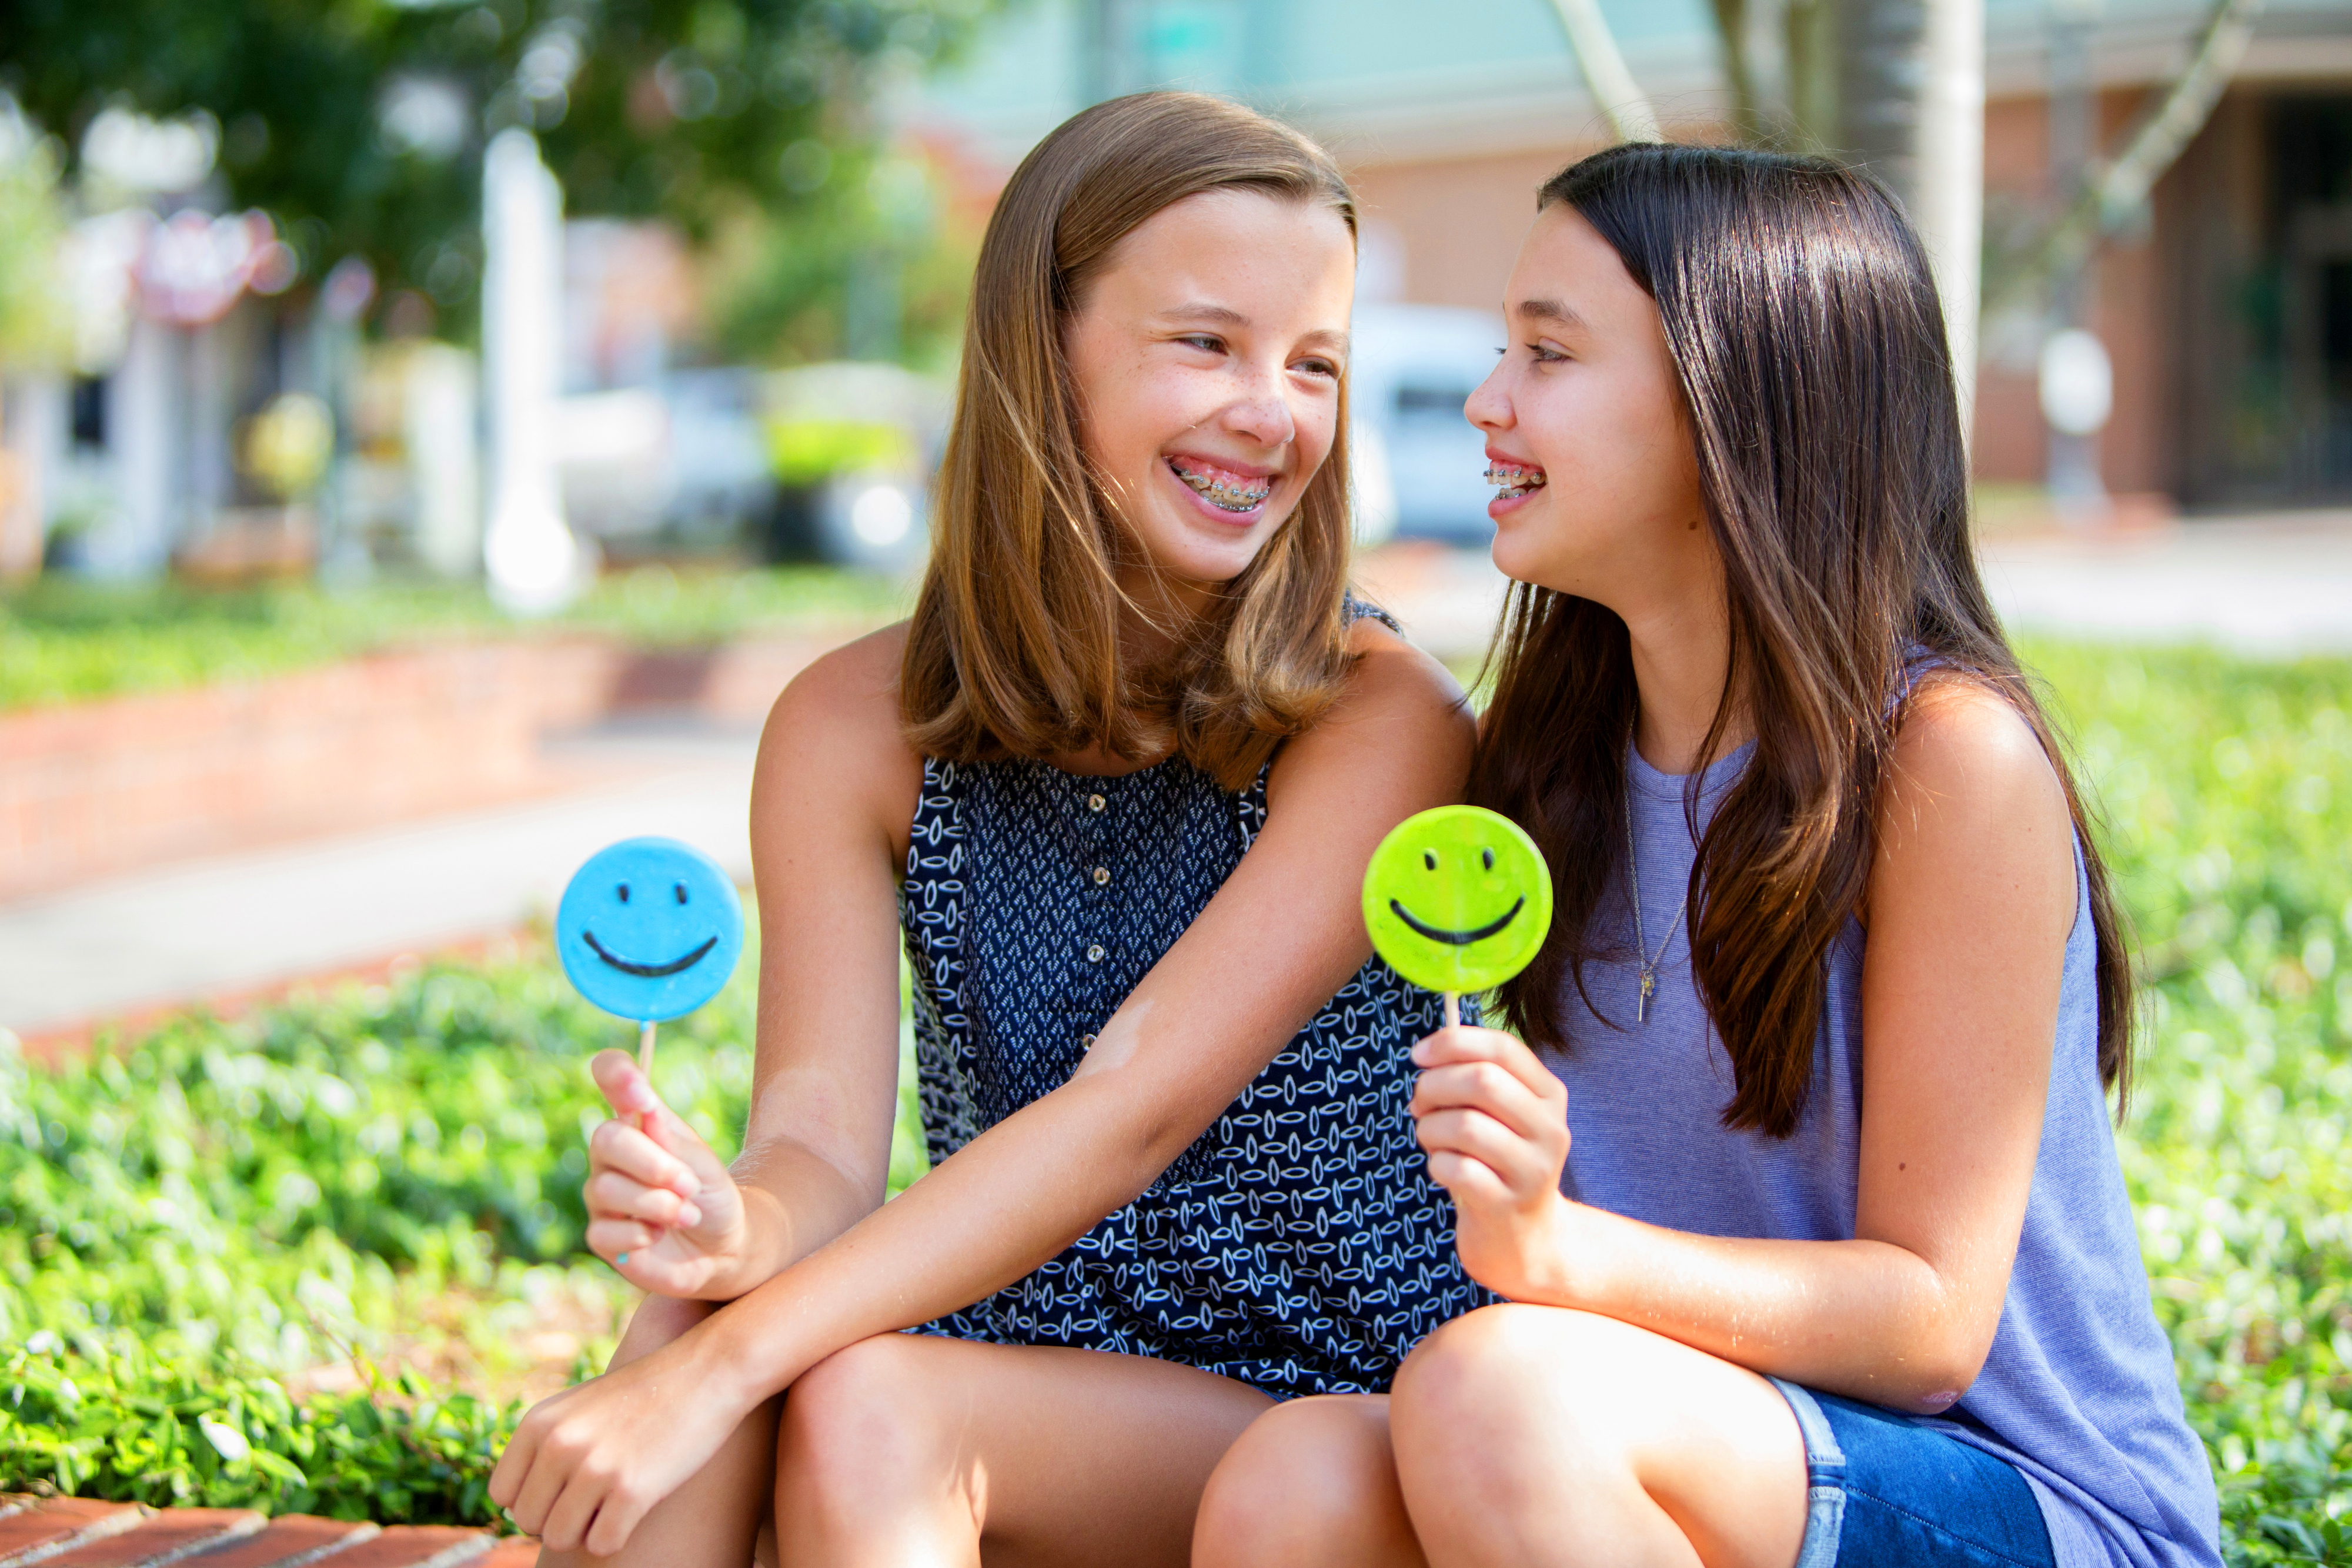 Two girls sitting outside, smiling, holding lollipop smiley faces